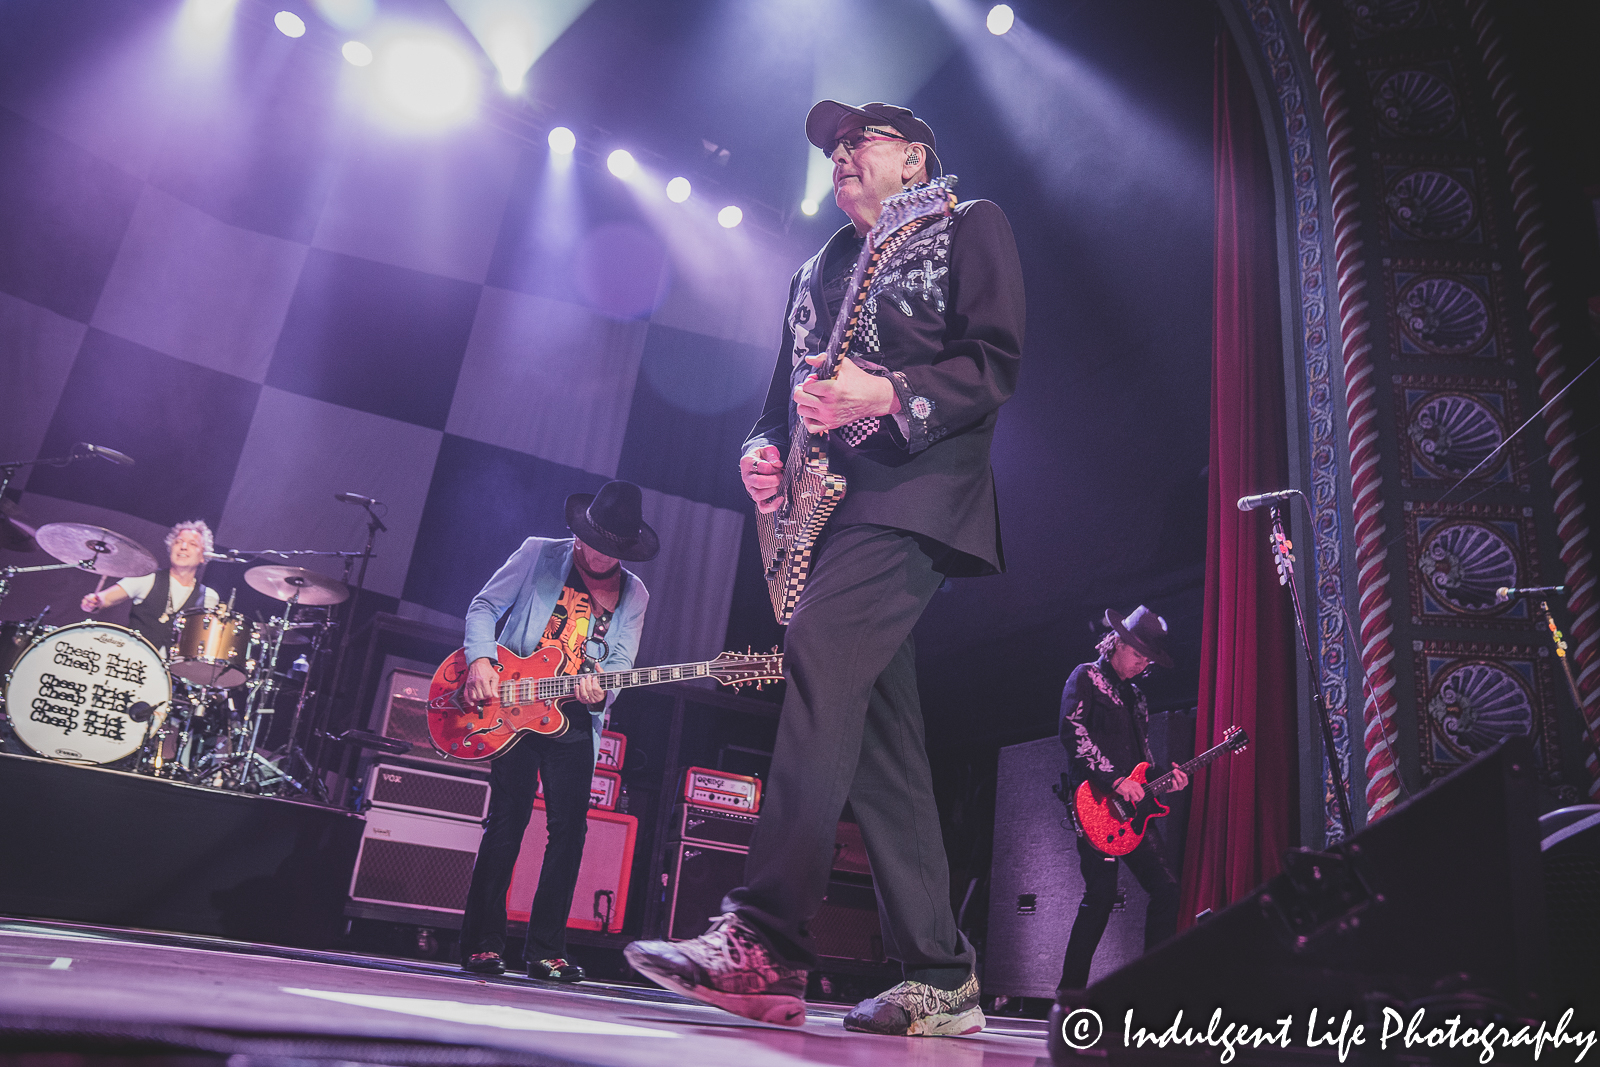 Guitarist Rick Nielsen of Cheap Trick performing with Daxx Nielsen, Tom Petersson and Robin Taylor Zander at Uptown Theater in Kansas City, MO on September 13, 2022.